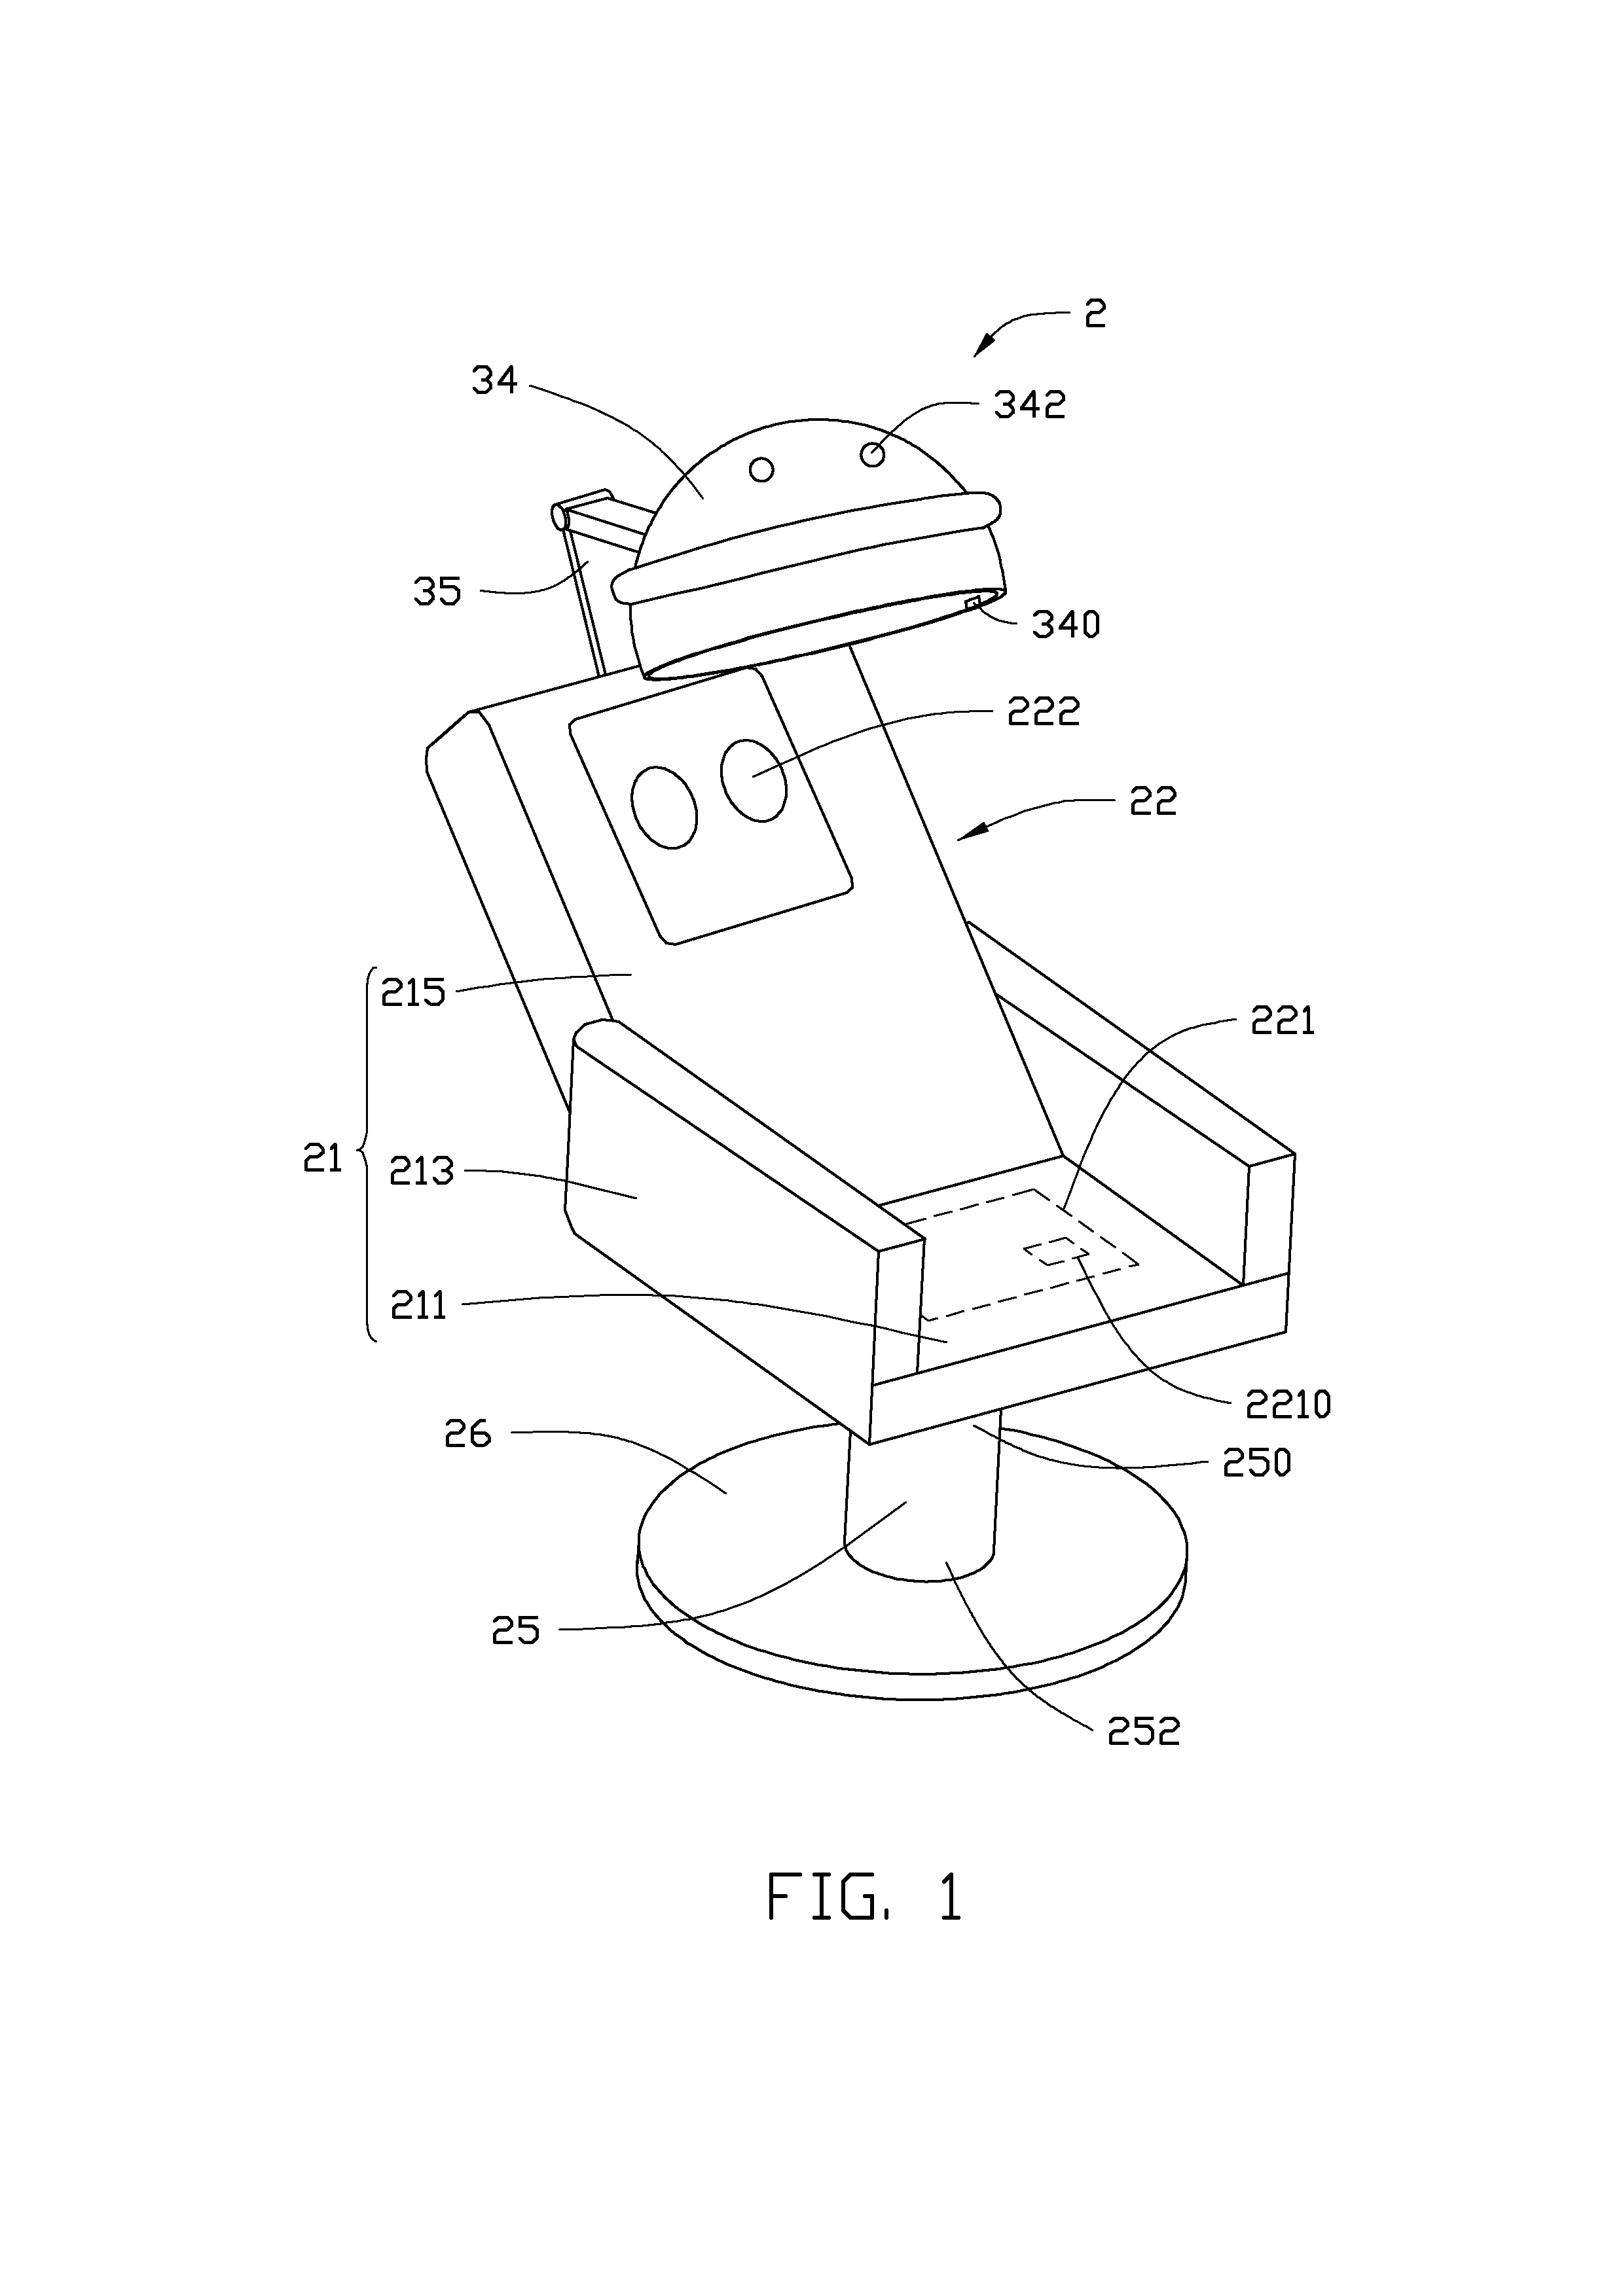 Physical therapy device applying multiple relaxation processes